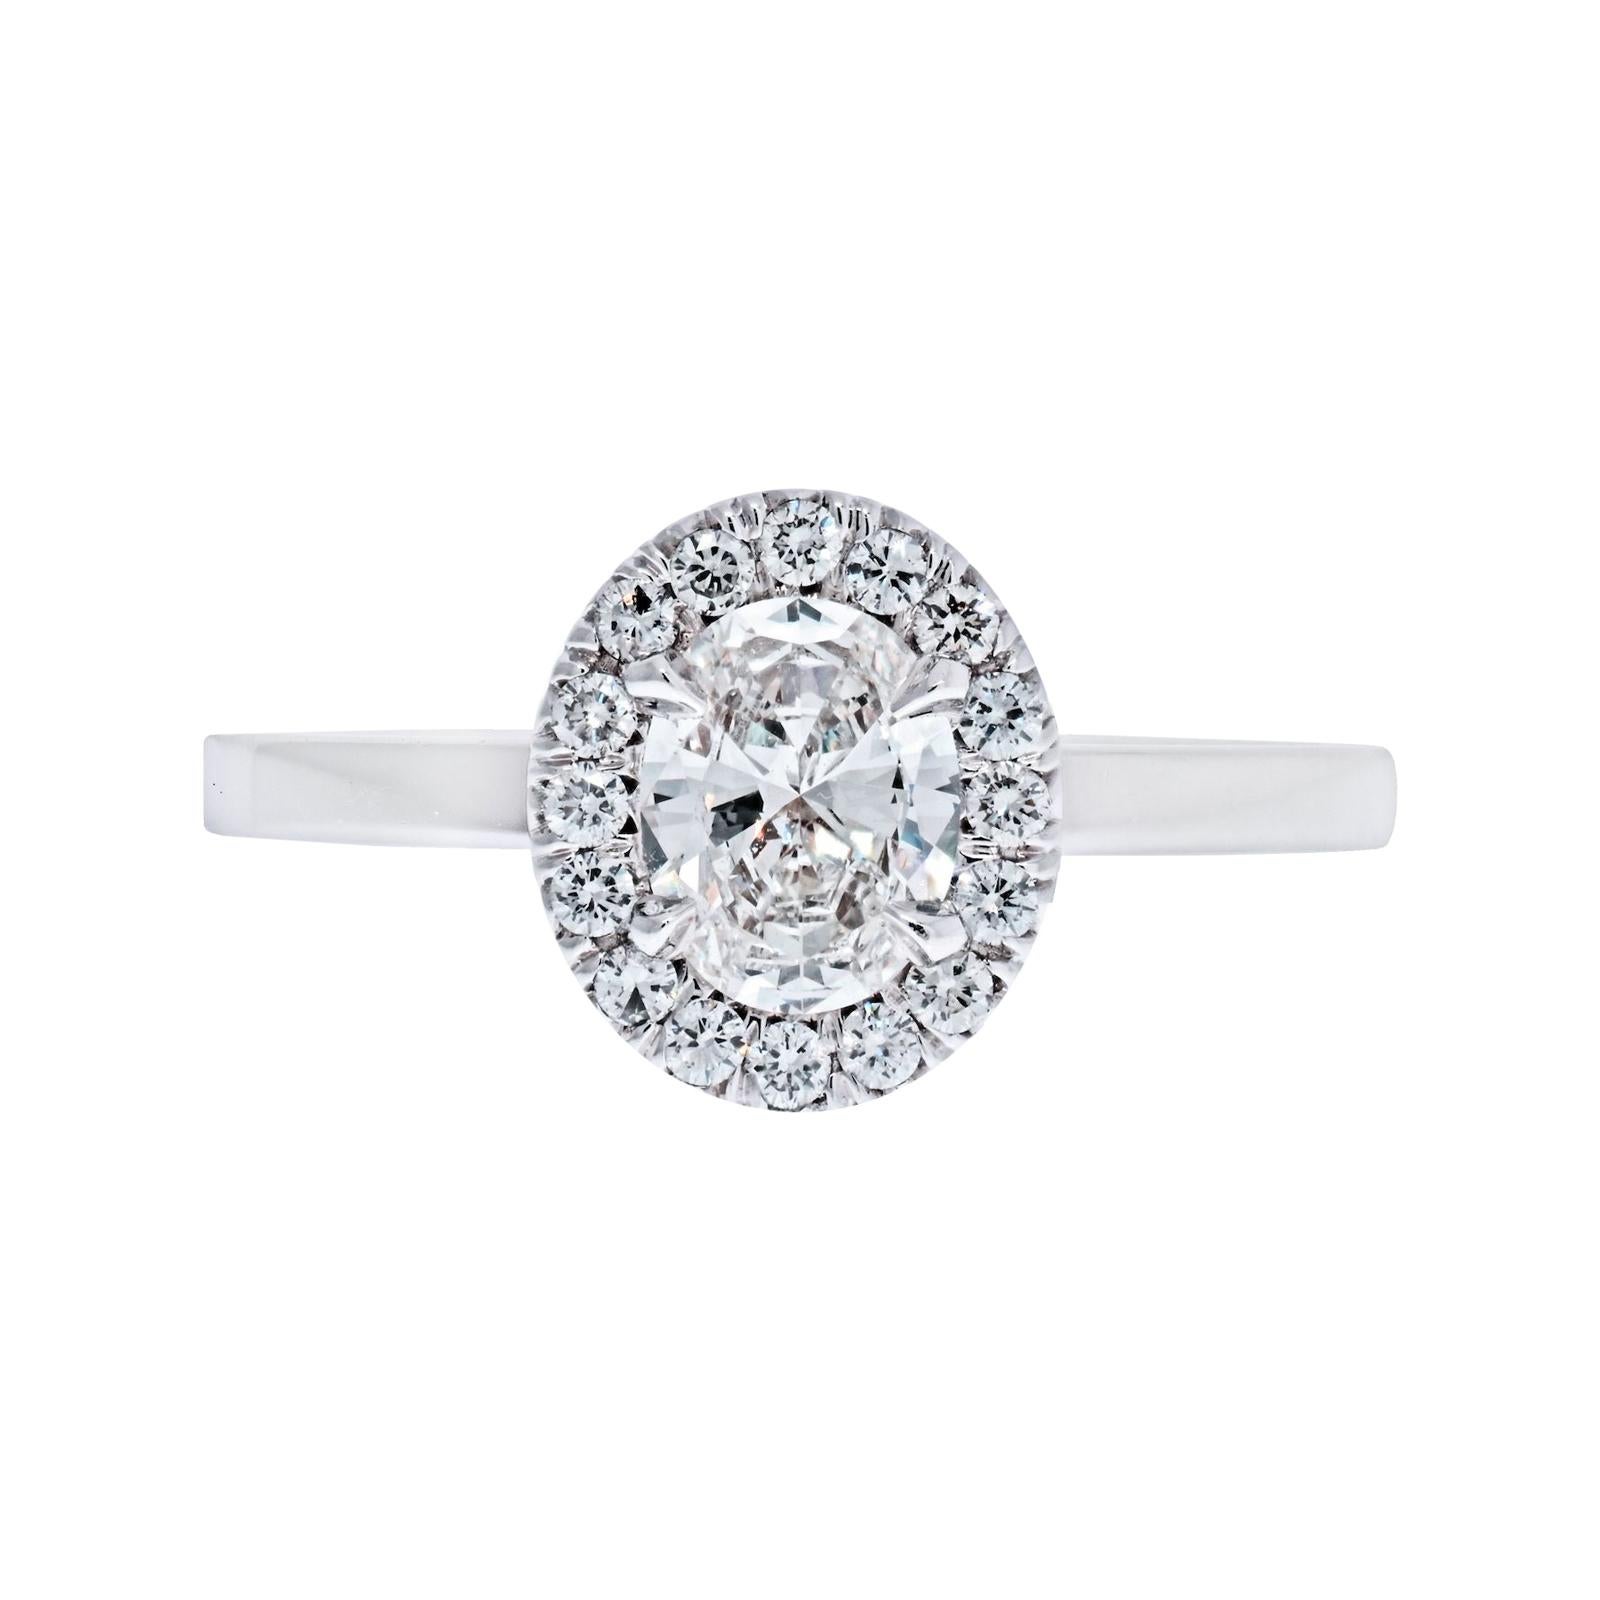 0.66 Carat Oval Diamond F/VS1 GIA Engagement Ring For Sale